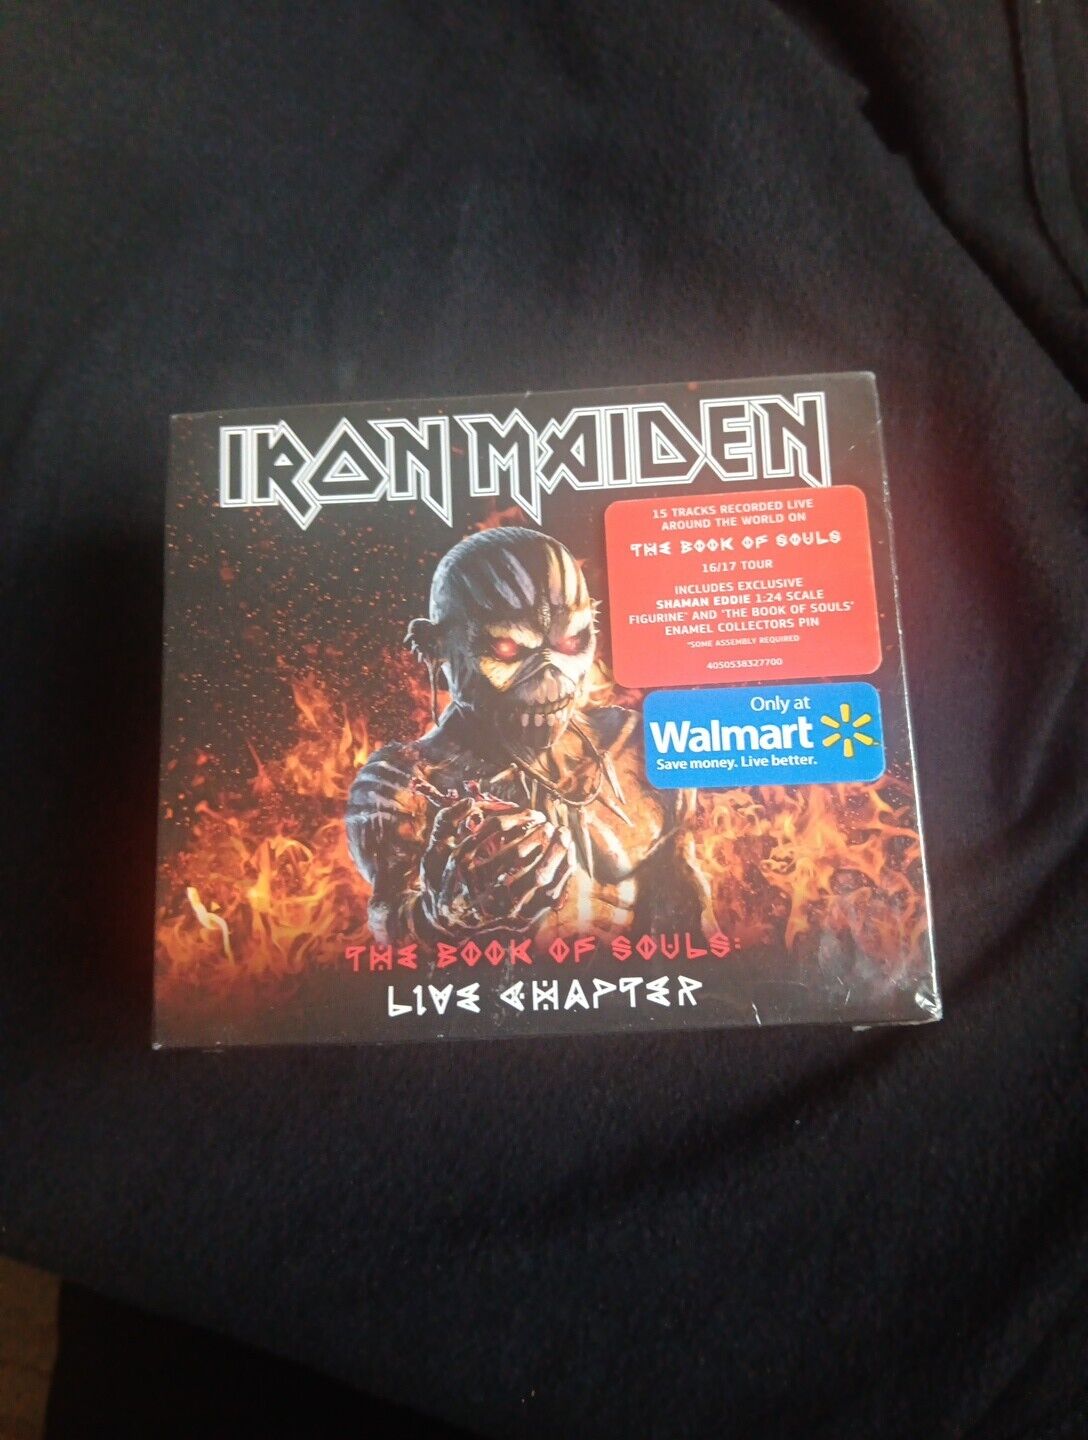 Iron Maiden The Book of Souls The Live Chapter 2 Cds + Figurine + Enamel Pin VG